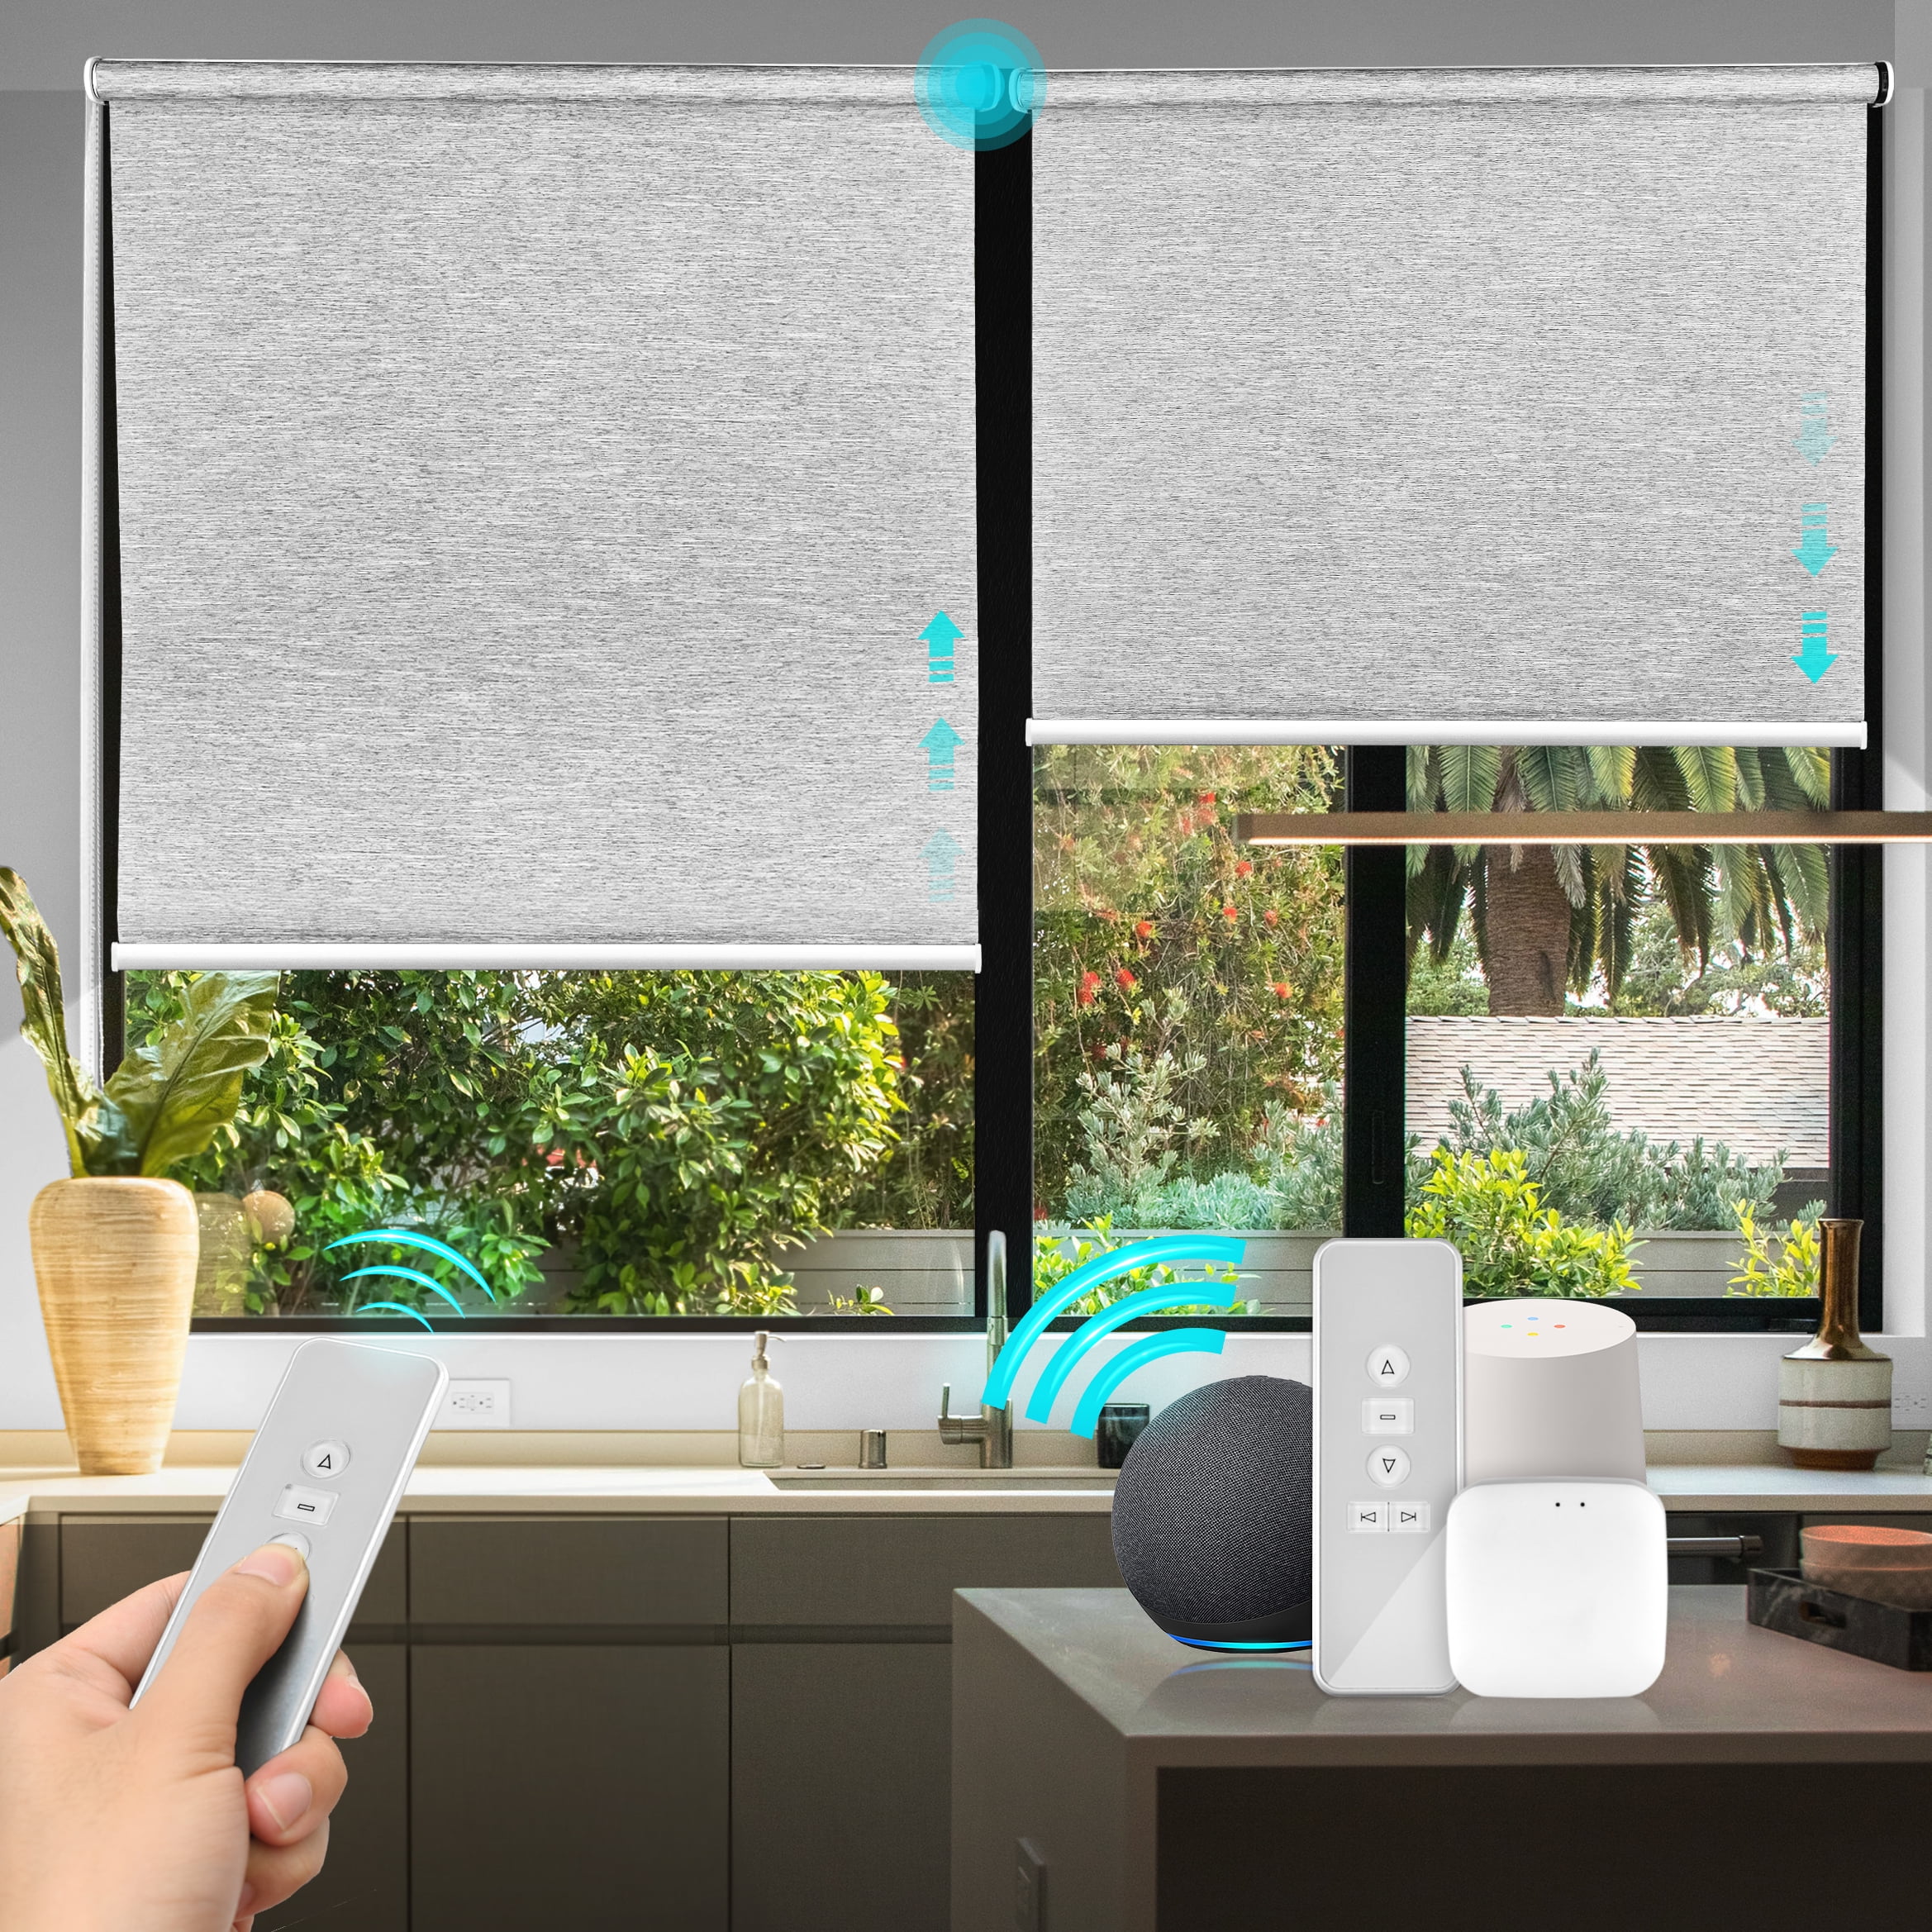 Biltek Smart Blinds for Windows Motorized Roller Blinds & Shades Cordless  Window Blinds Electric Blinds with Remote Automatic Window Shades For Home